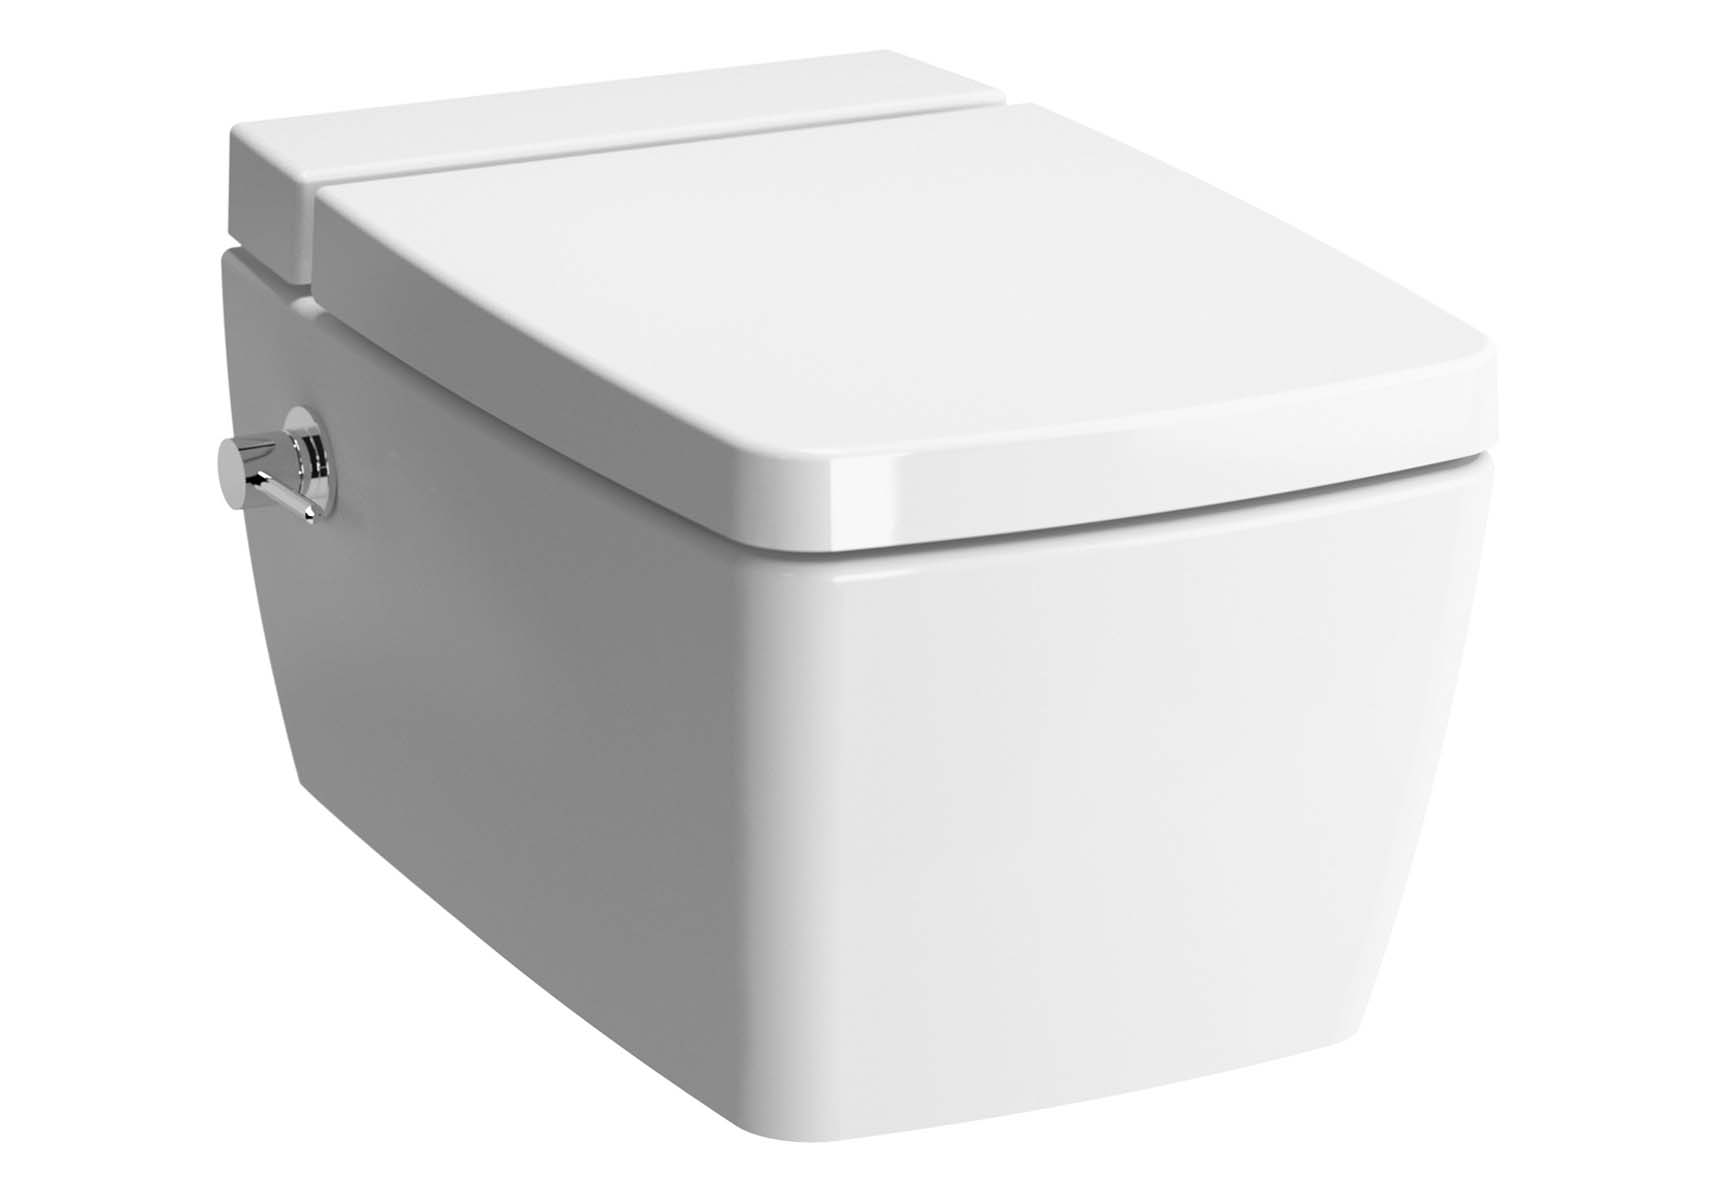 Metropole Rim-ex Wall-hung WC pan, with bidet function, with thermostatic integrated stop valve (on right), with VitrAfresh liquid cleaner tank